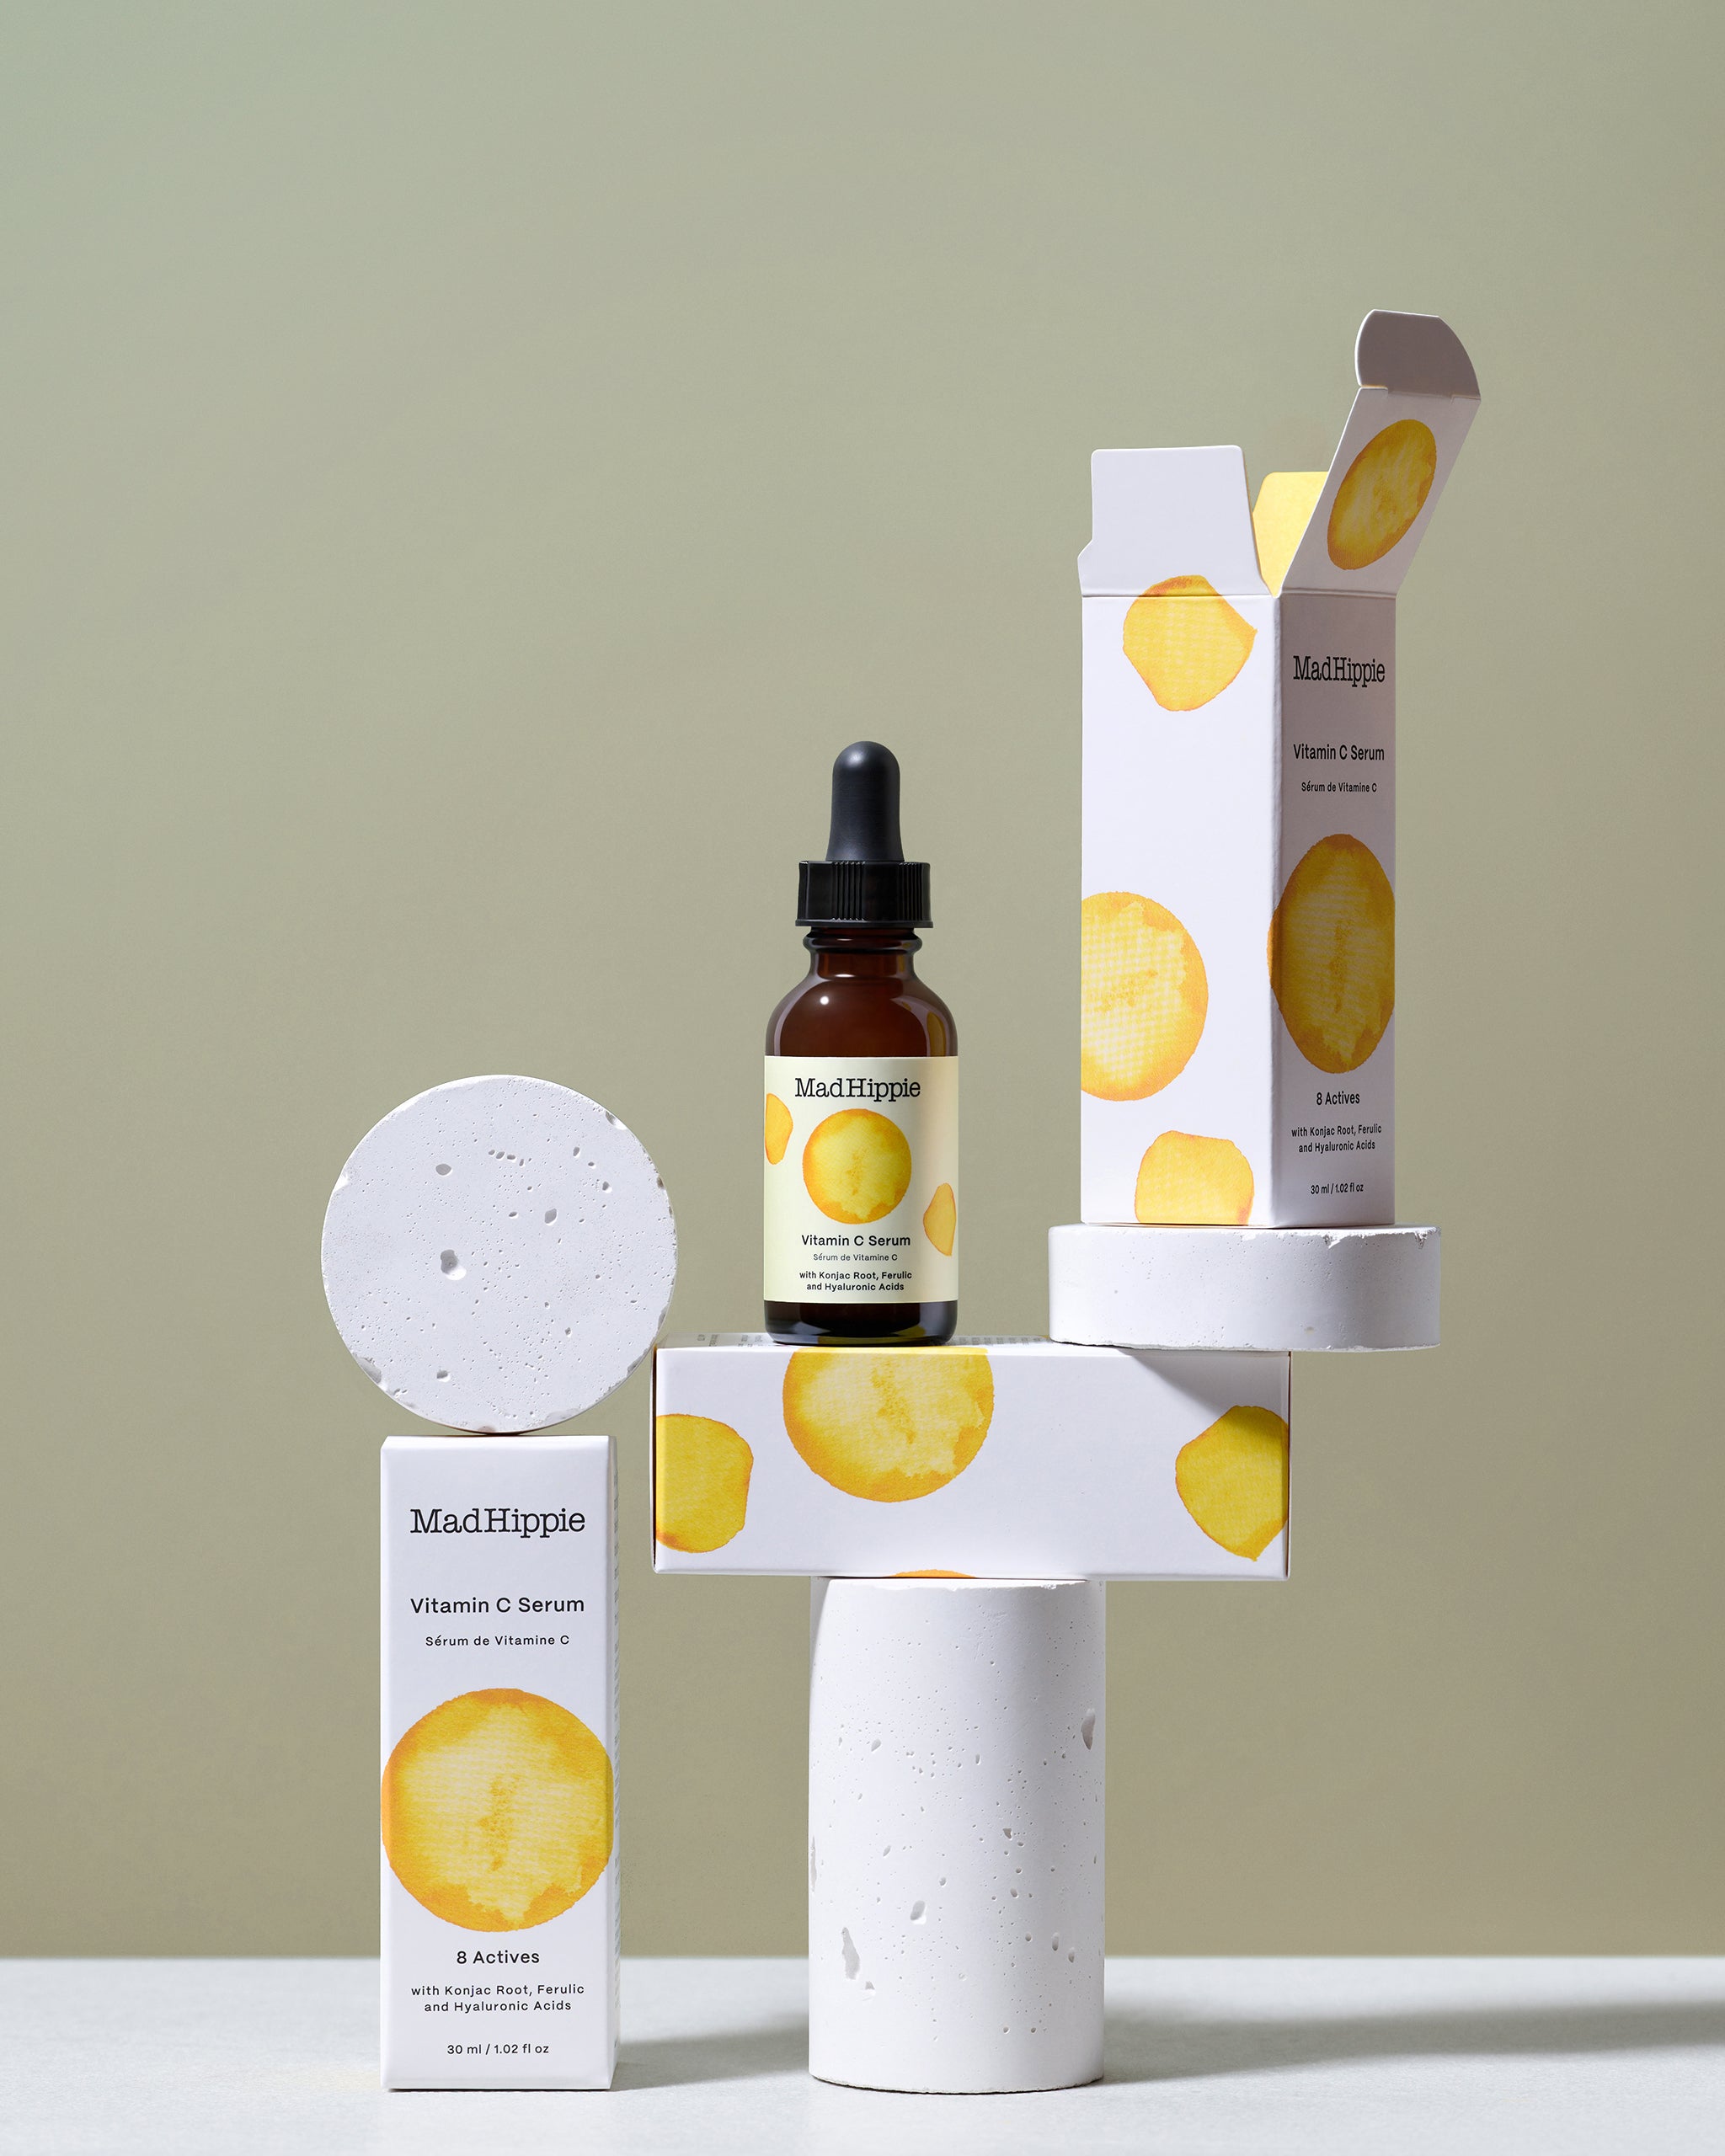 Vitamin C Serum bottle + boxes, sitting on stone slabs, with pale green background